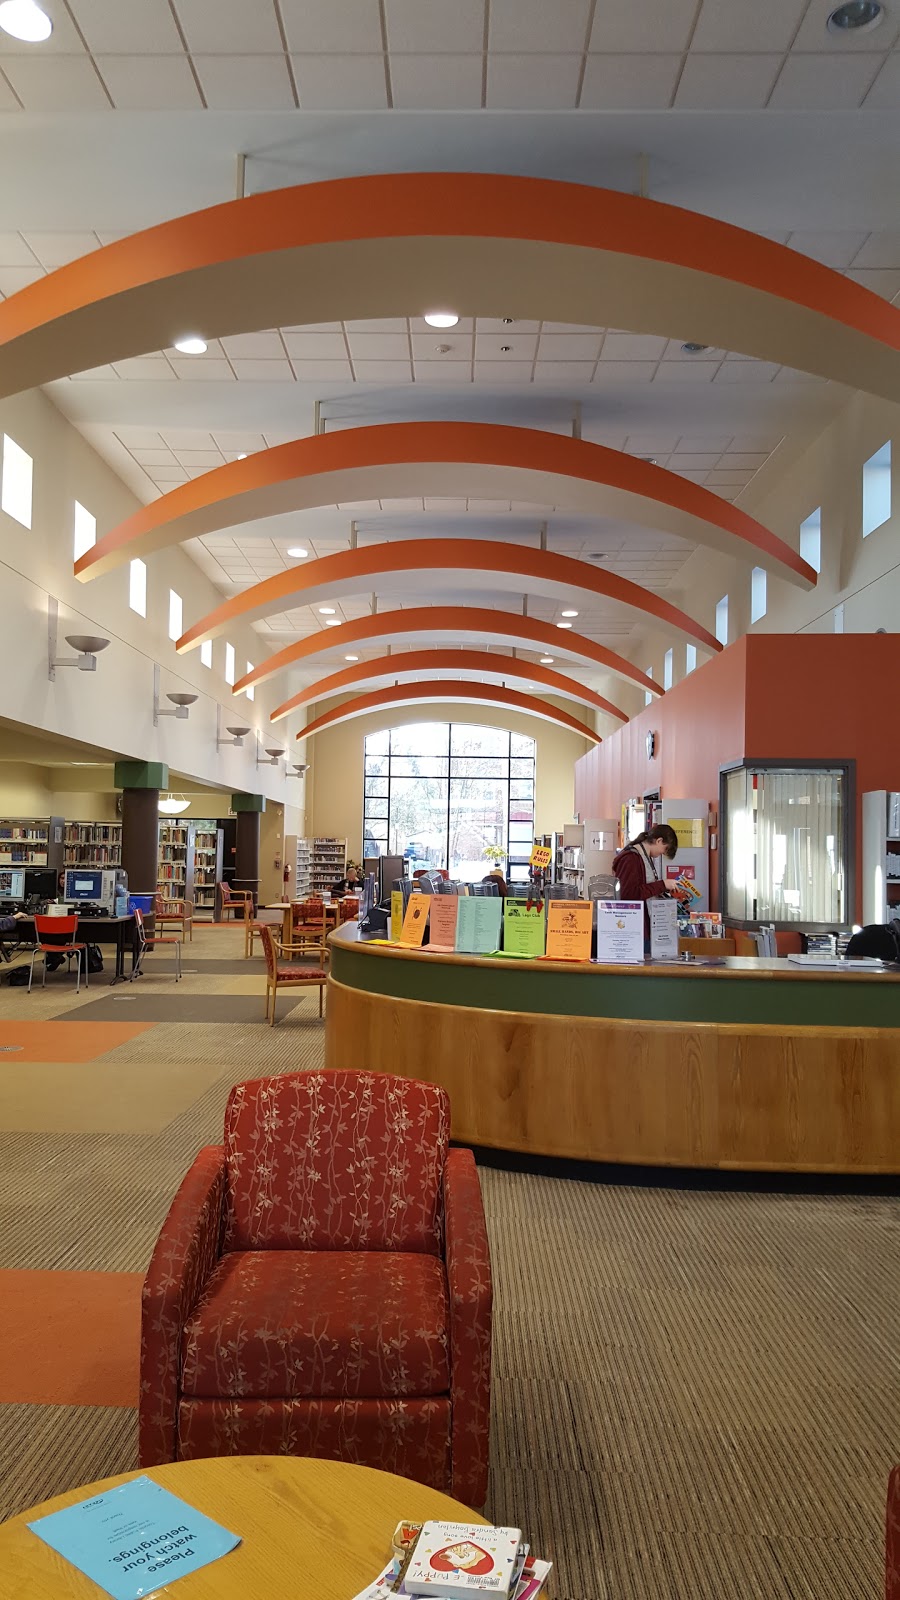 Toronto Public Library - New Toronto Library | library | 110 Eleventh St, Etobicoke, ON M8V 3G5, Canada | 4163945350 OR +1 416-394-5350